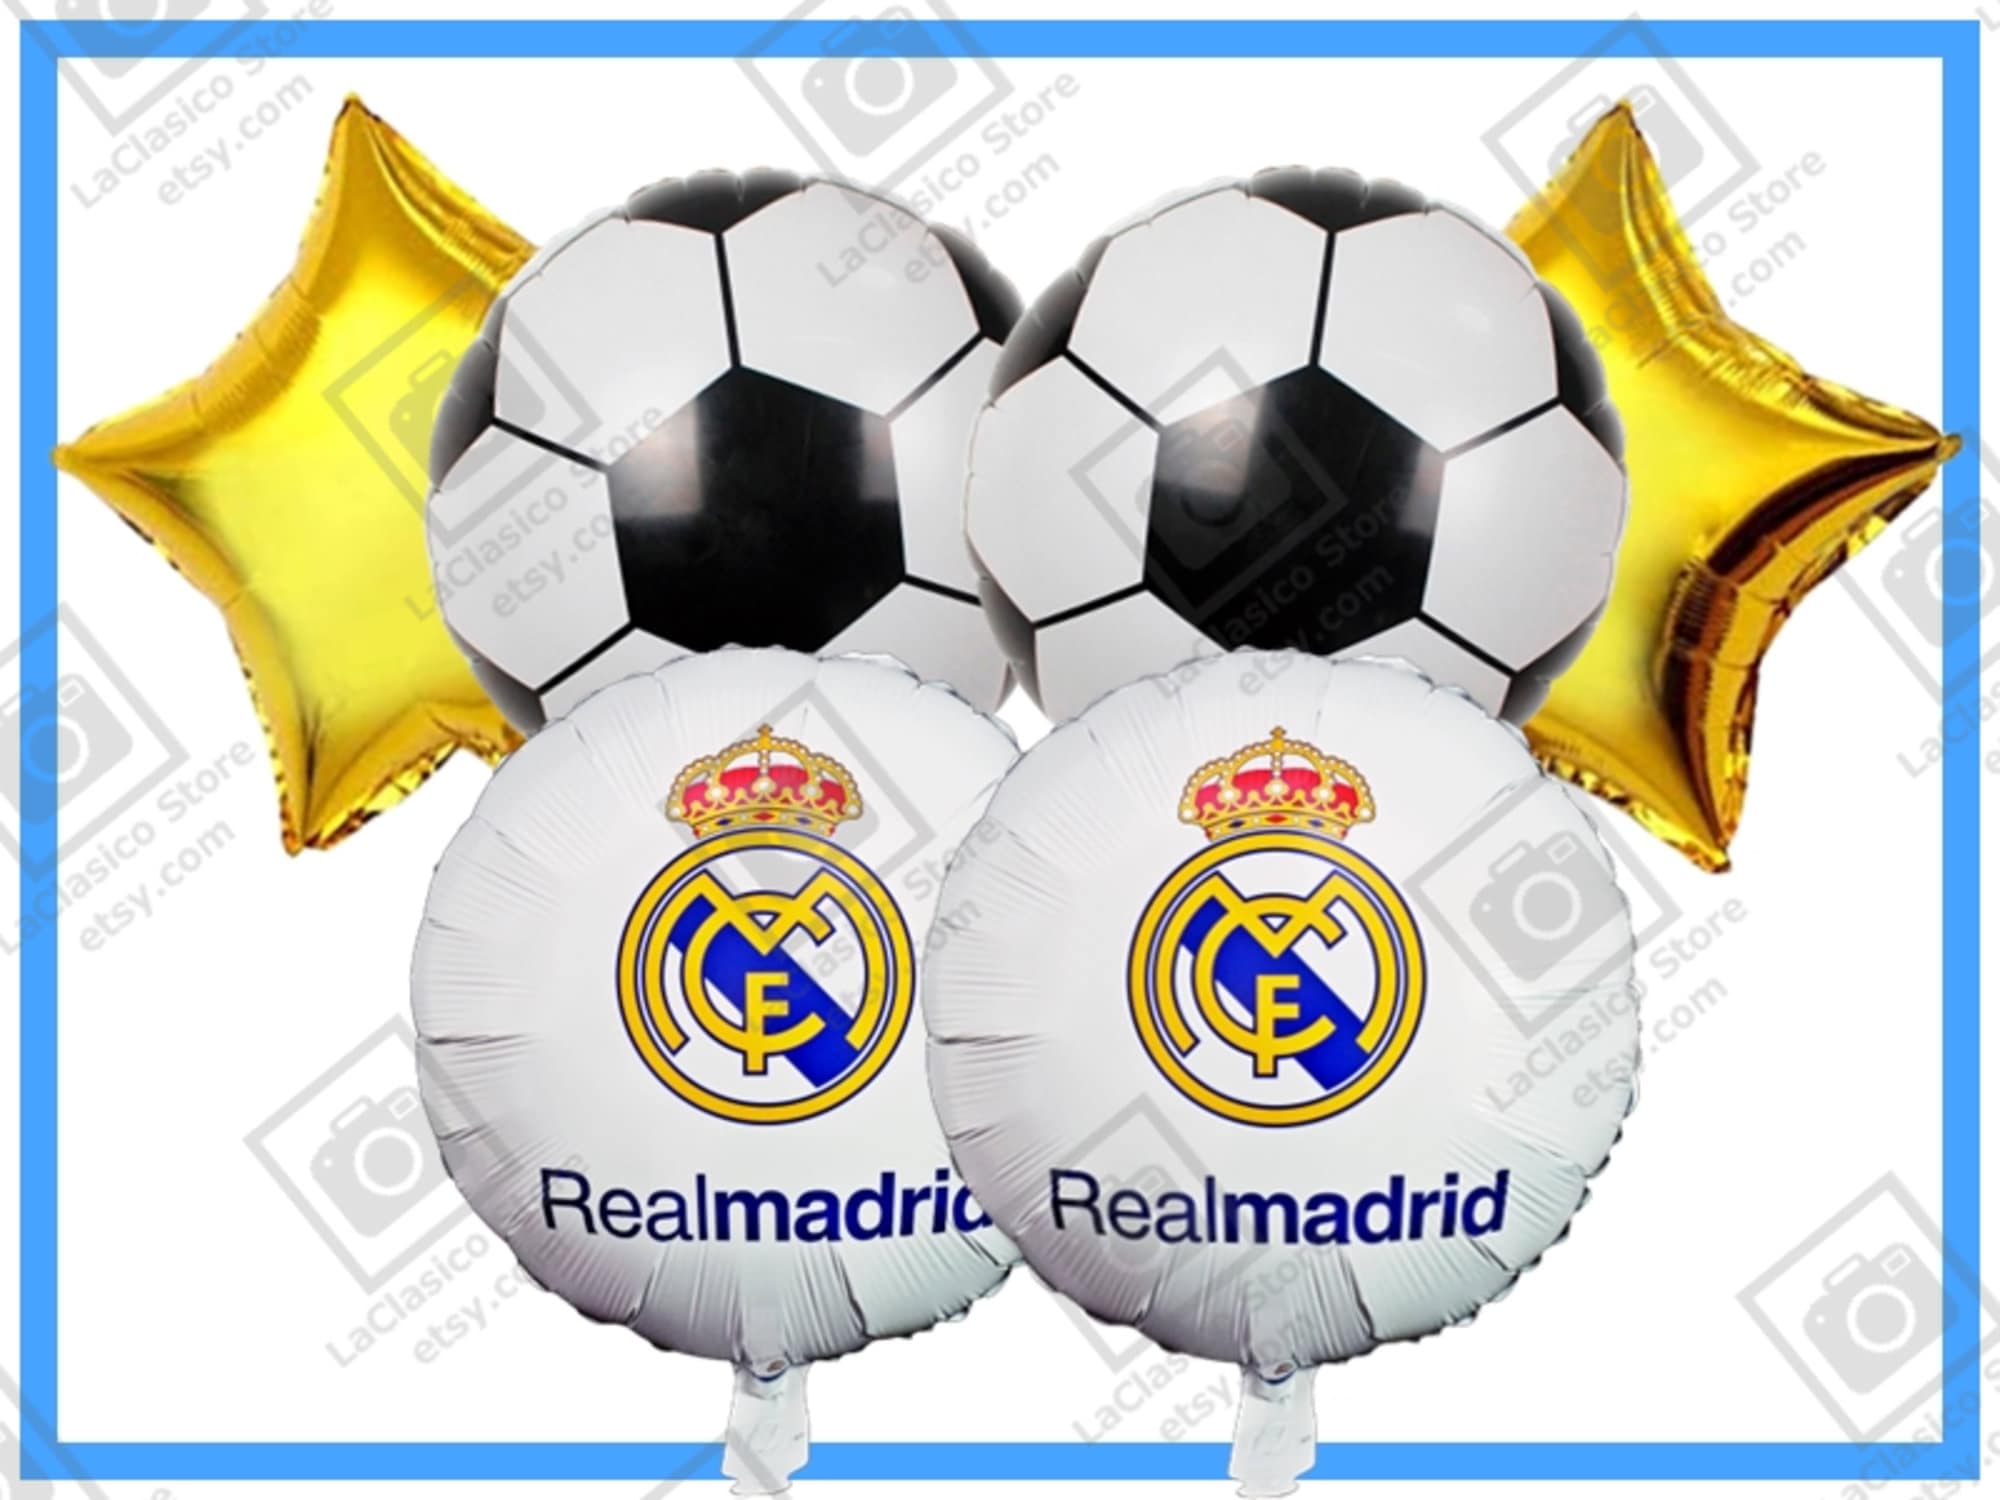 krater Glad fundament Real Madrid Party Balloons Set 10 PCS Aluminium All in One - Etsy